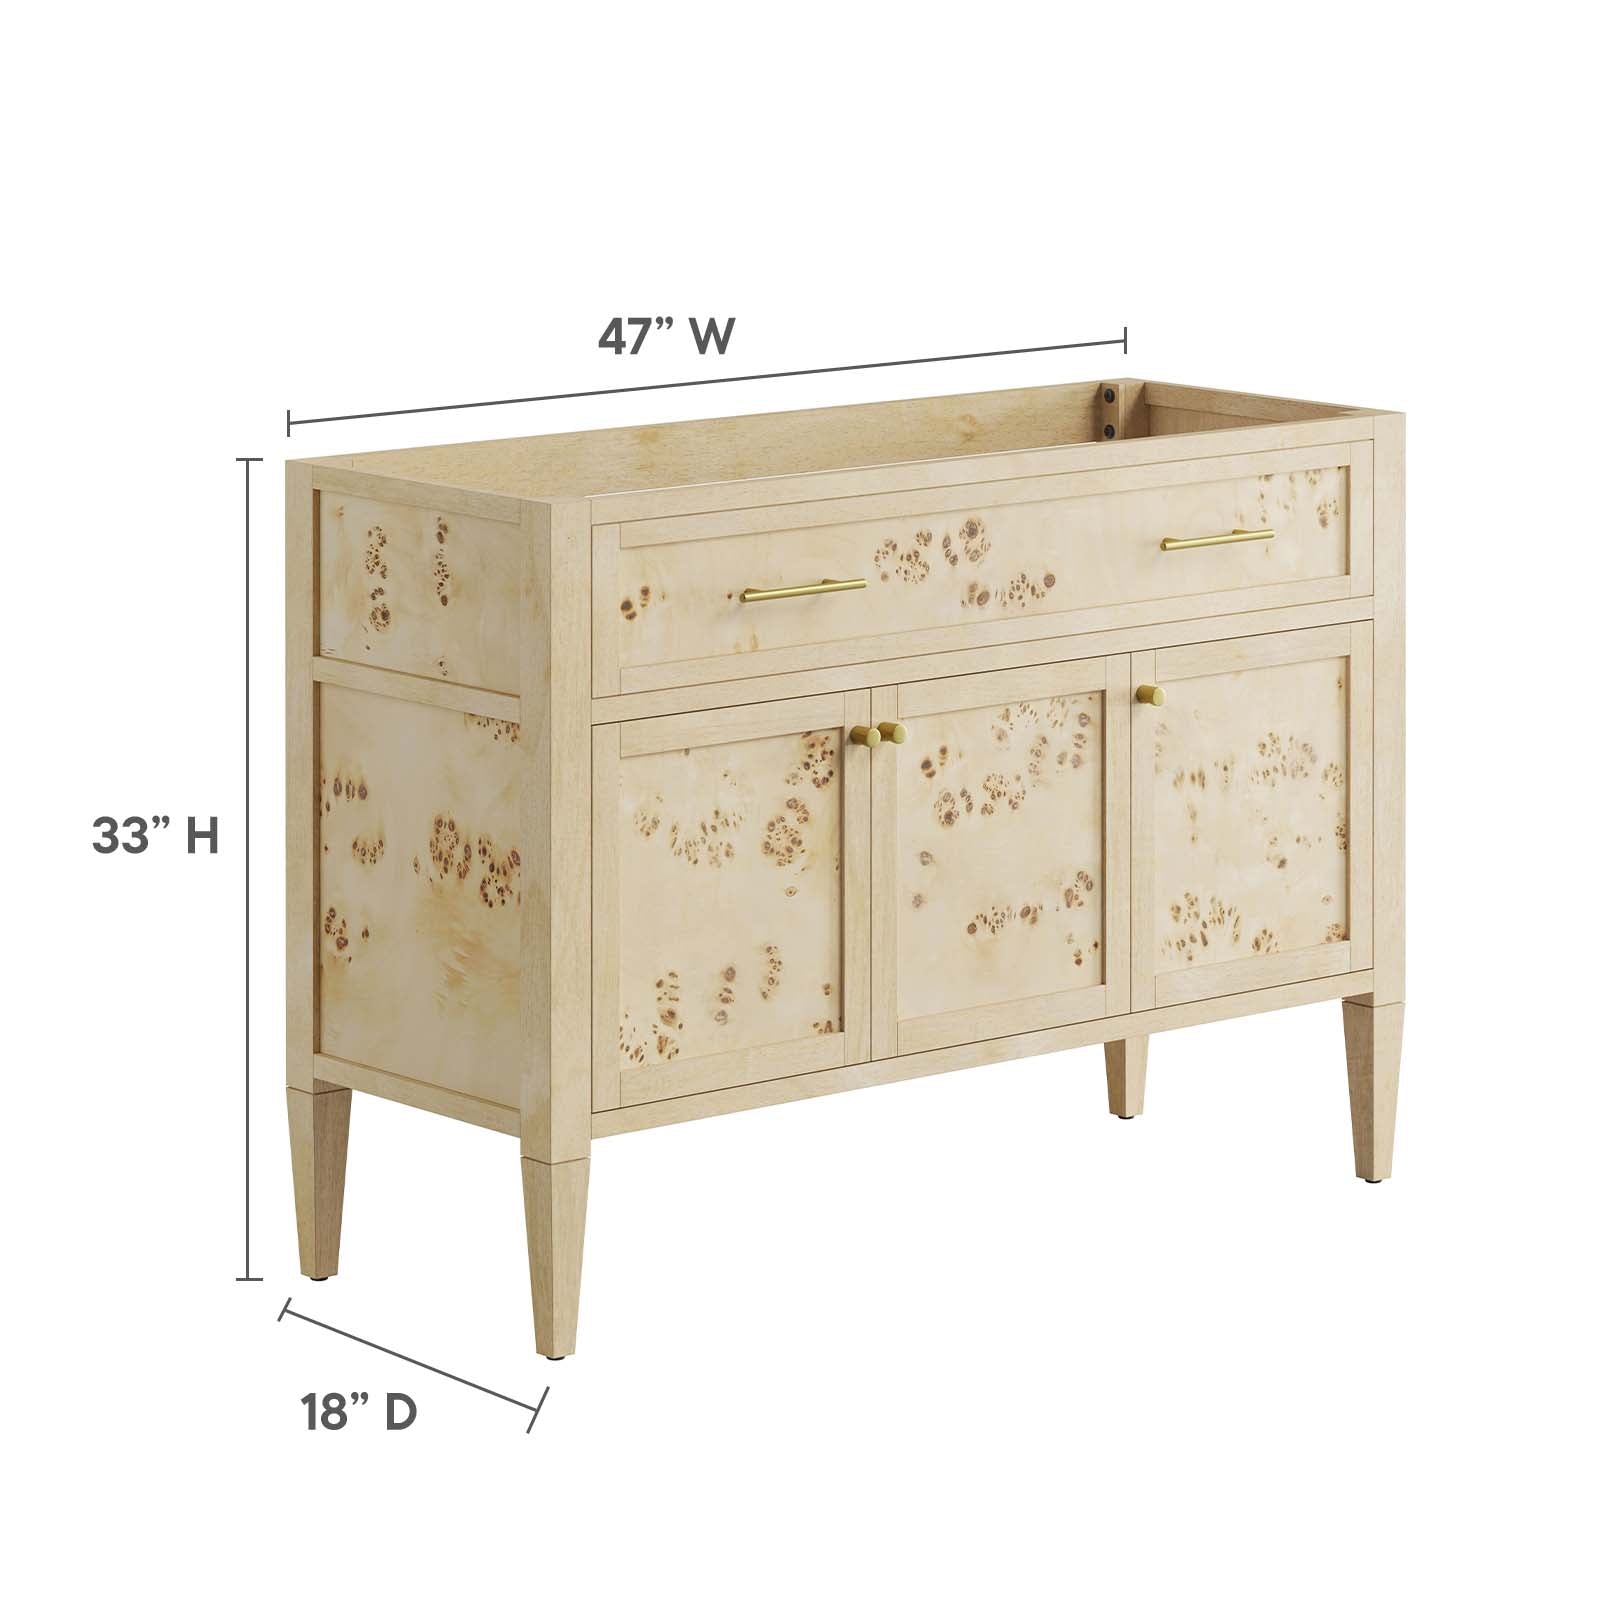 Elysian 48" Wood Bathroom Vanity Cabinet (Sink Basin Not Included) By Modway - EEI-6140 | Bathroom Accessories | Modway - 17